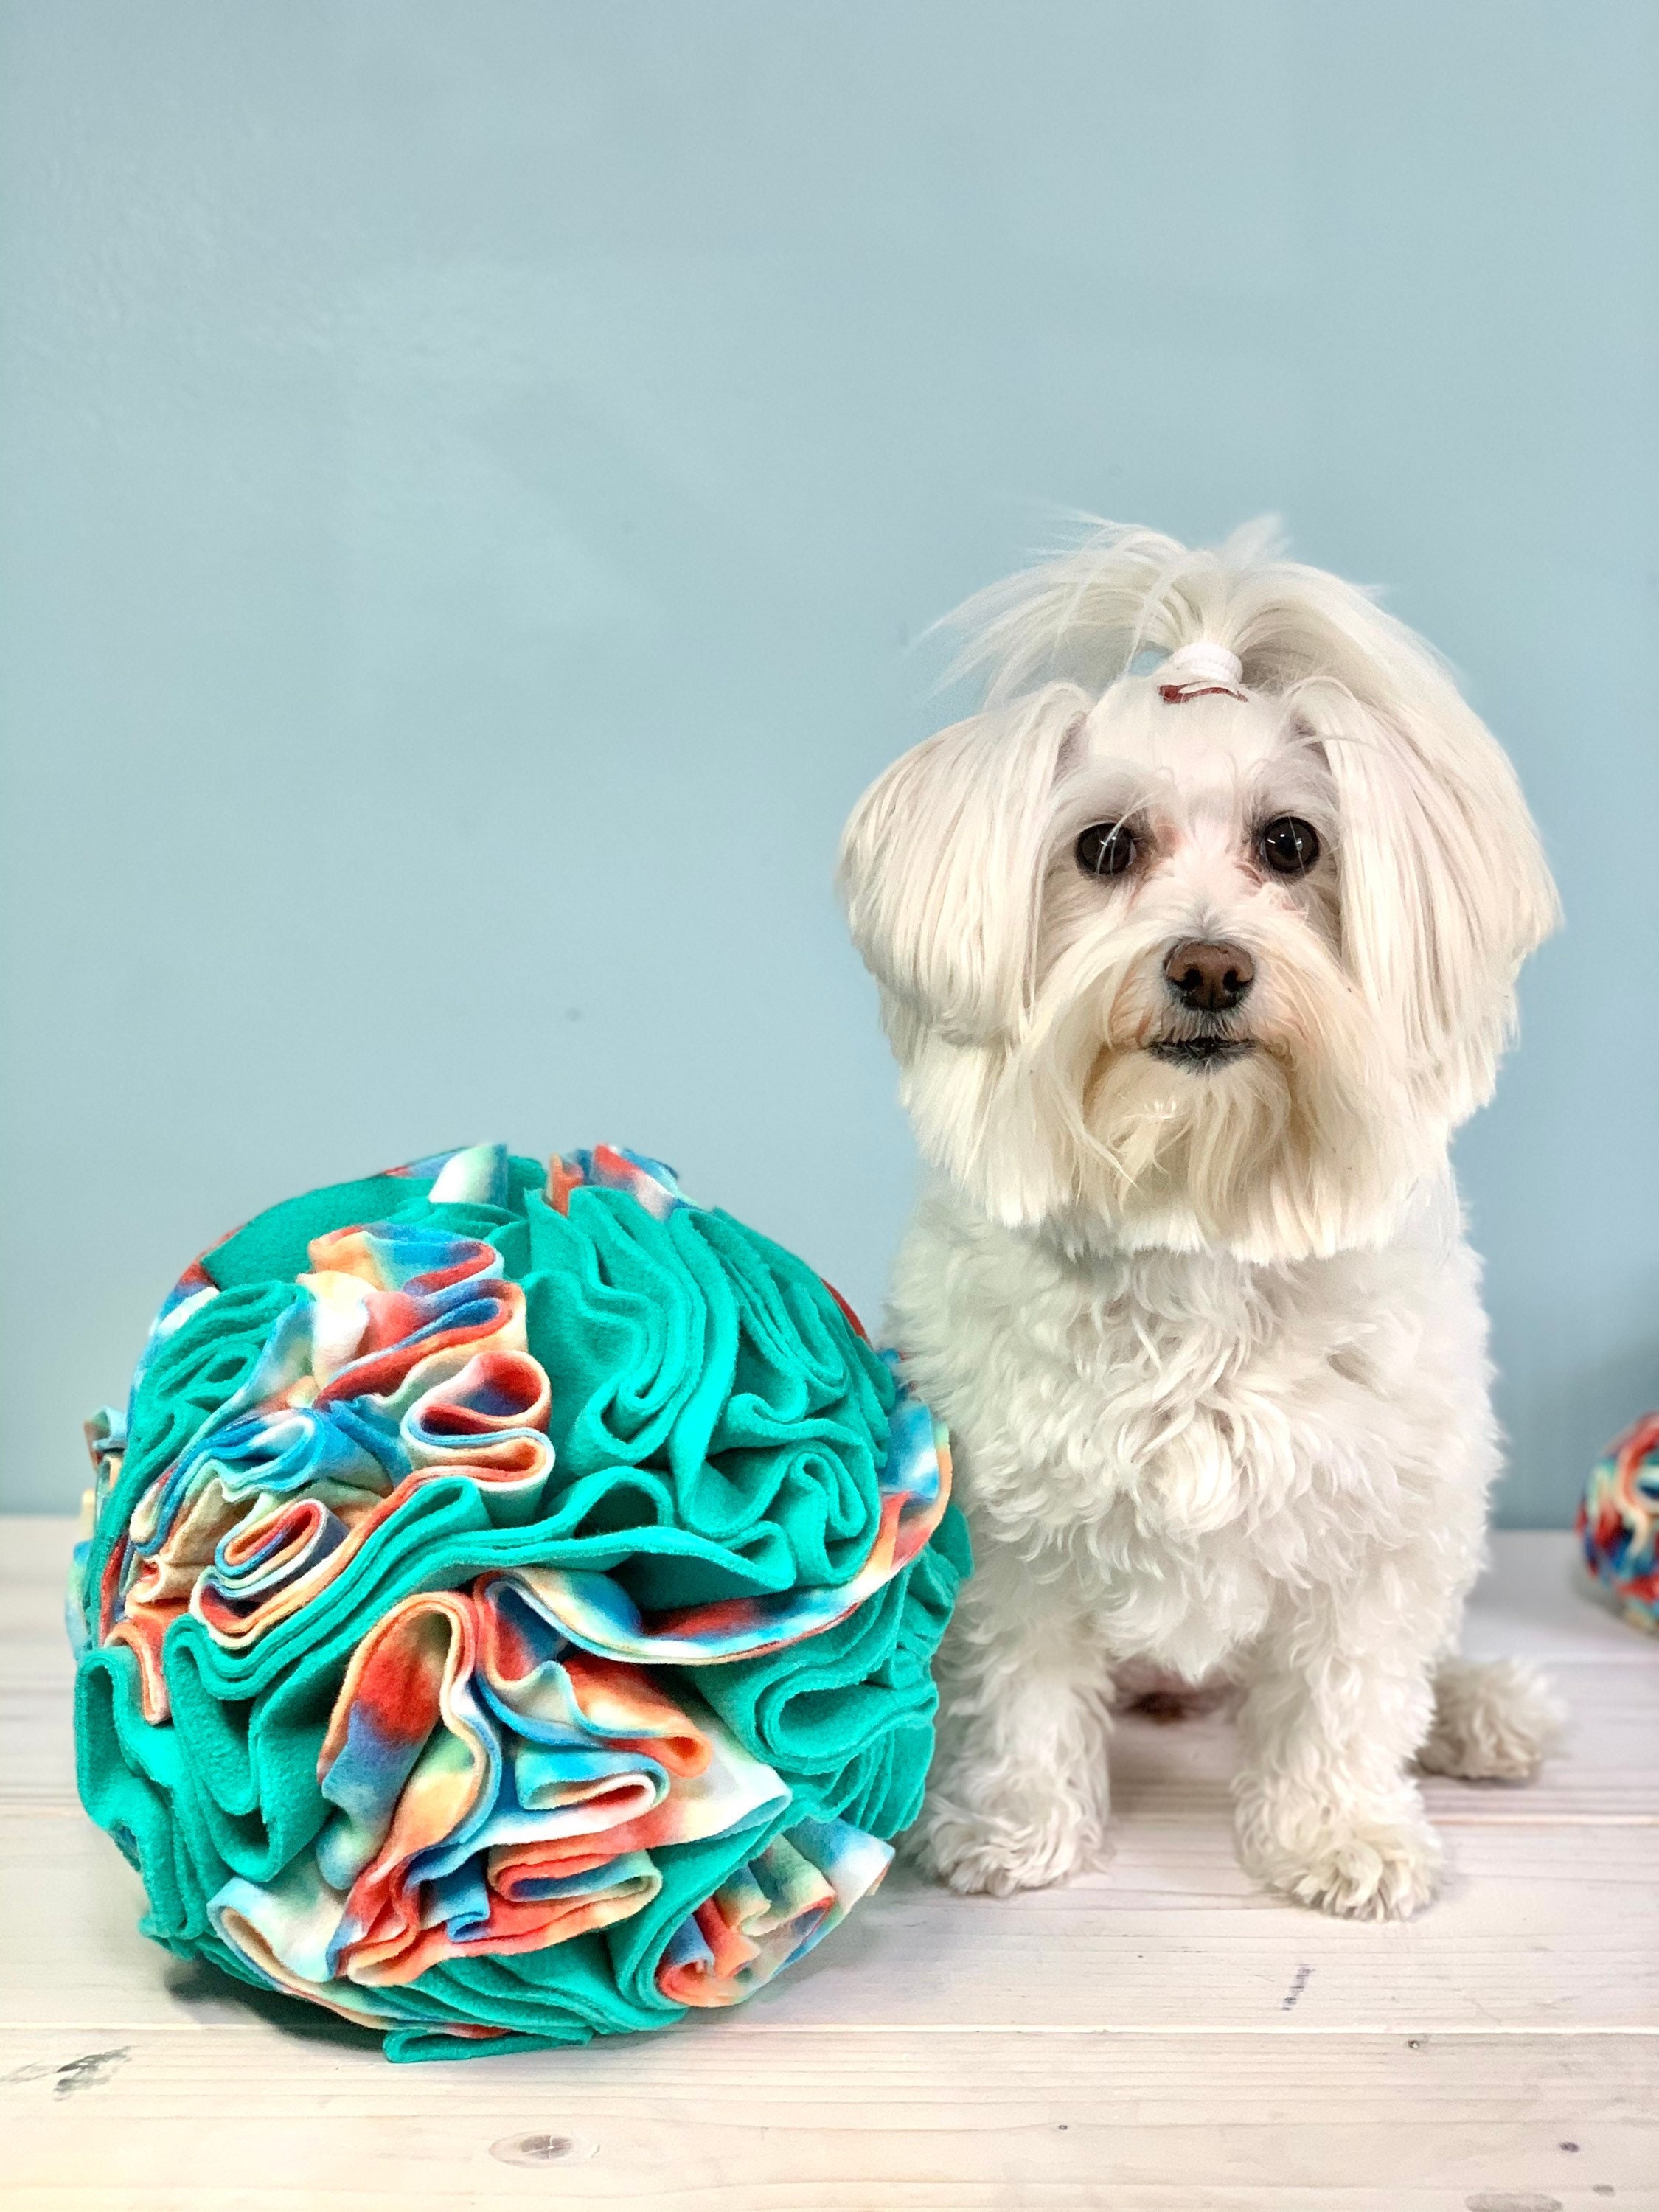 How to make a DIY snuffle ball 